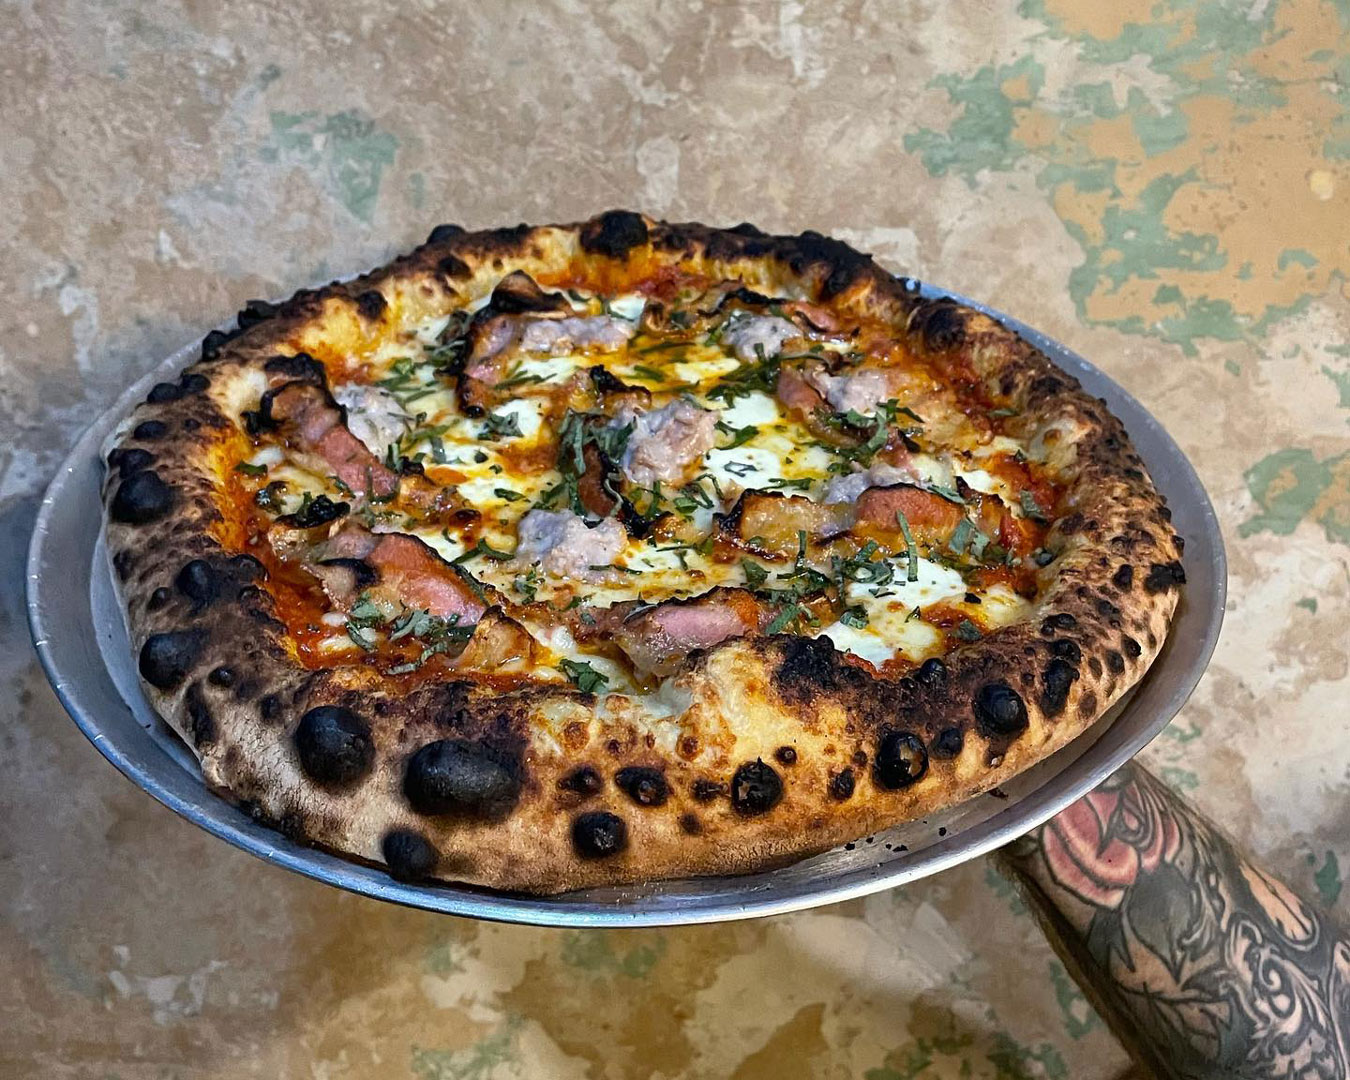 Woodfired pizza